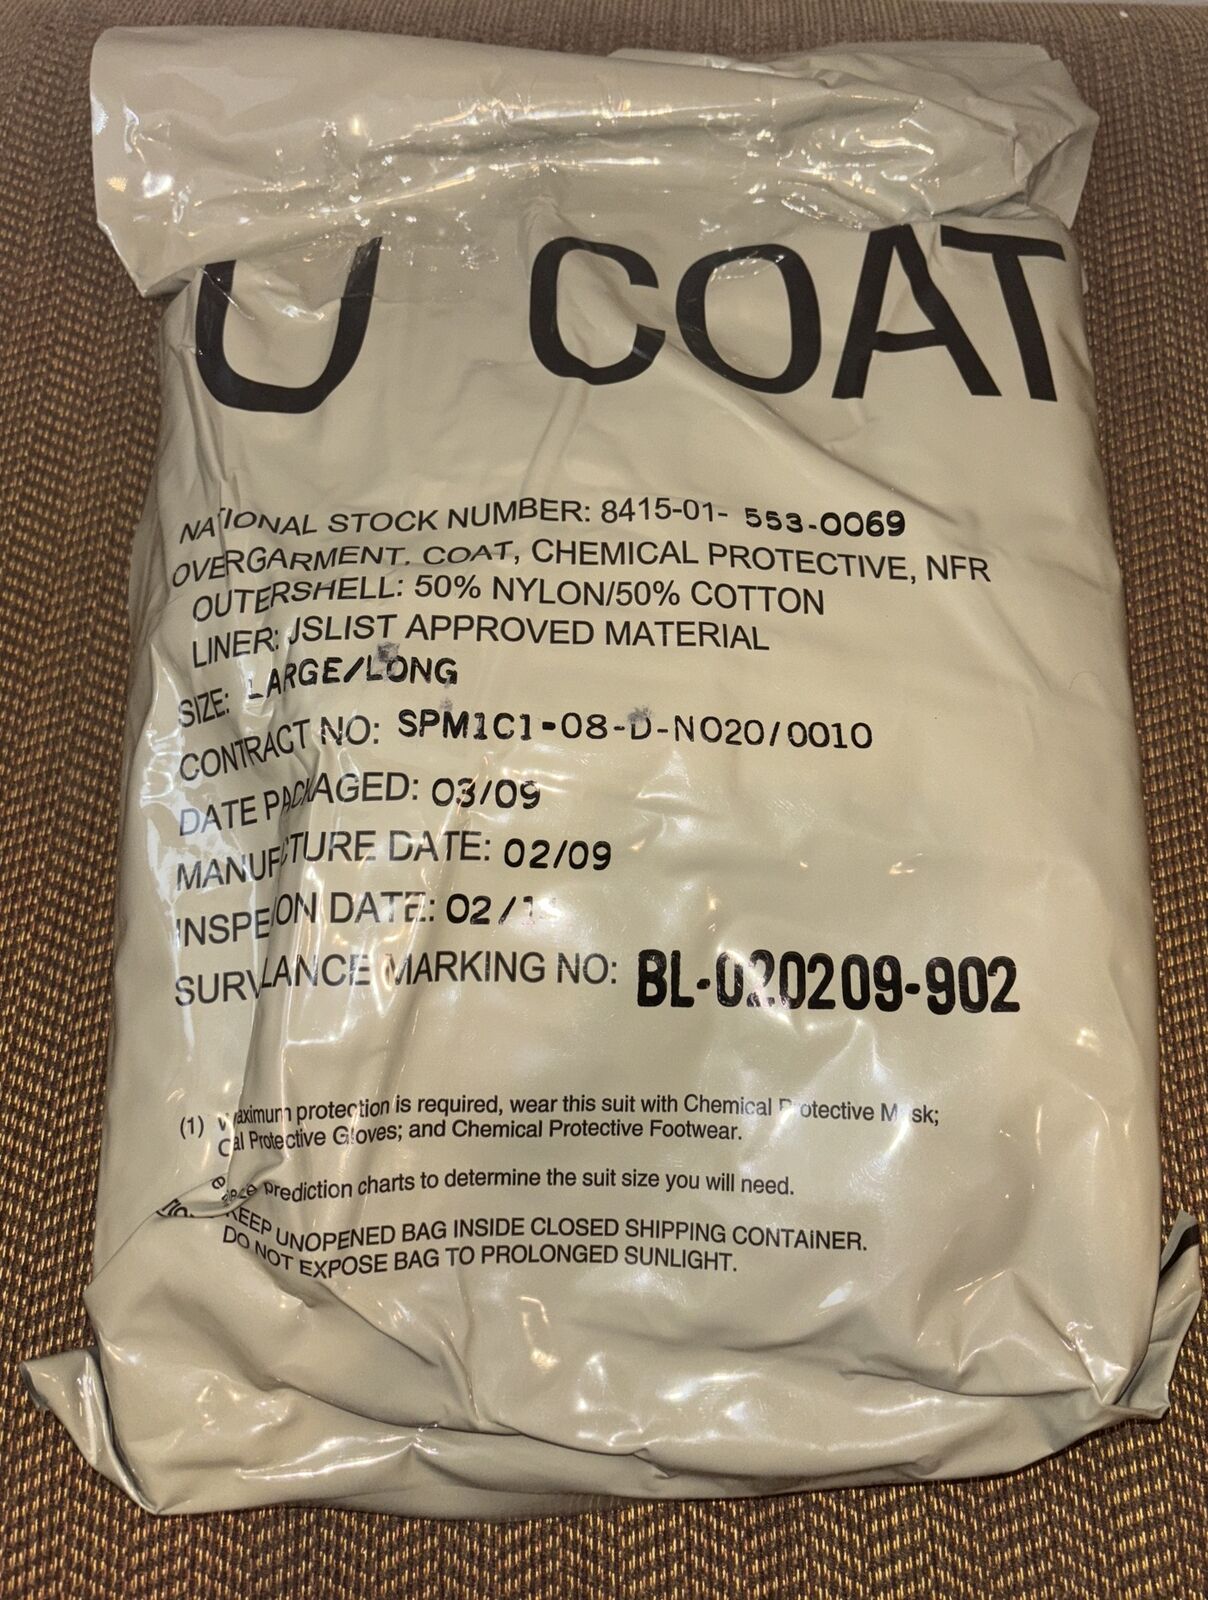 Military Overgarment Chemical Protective Coat Large/Long Sealed 2009